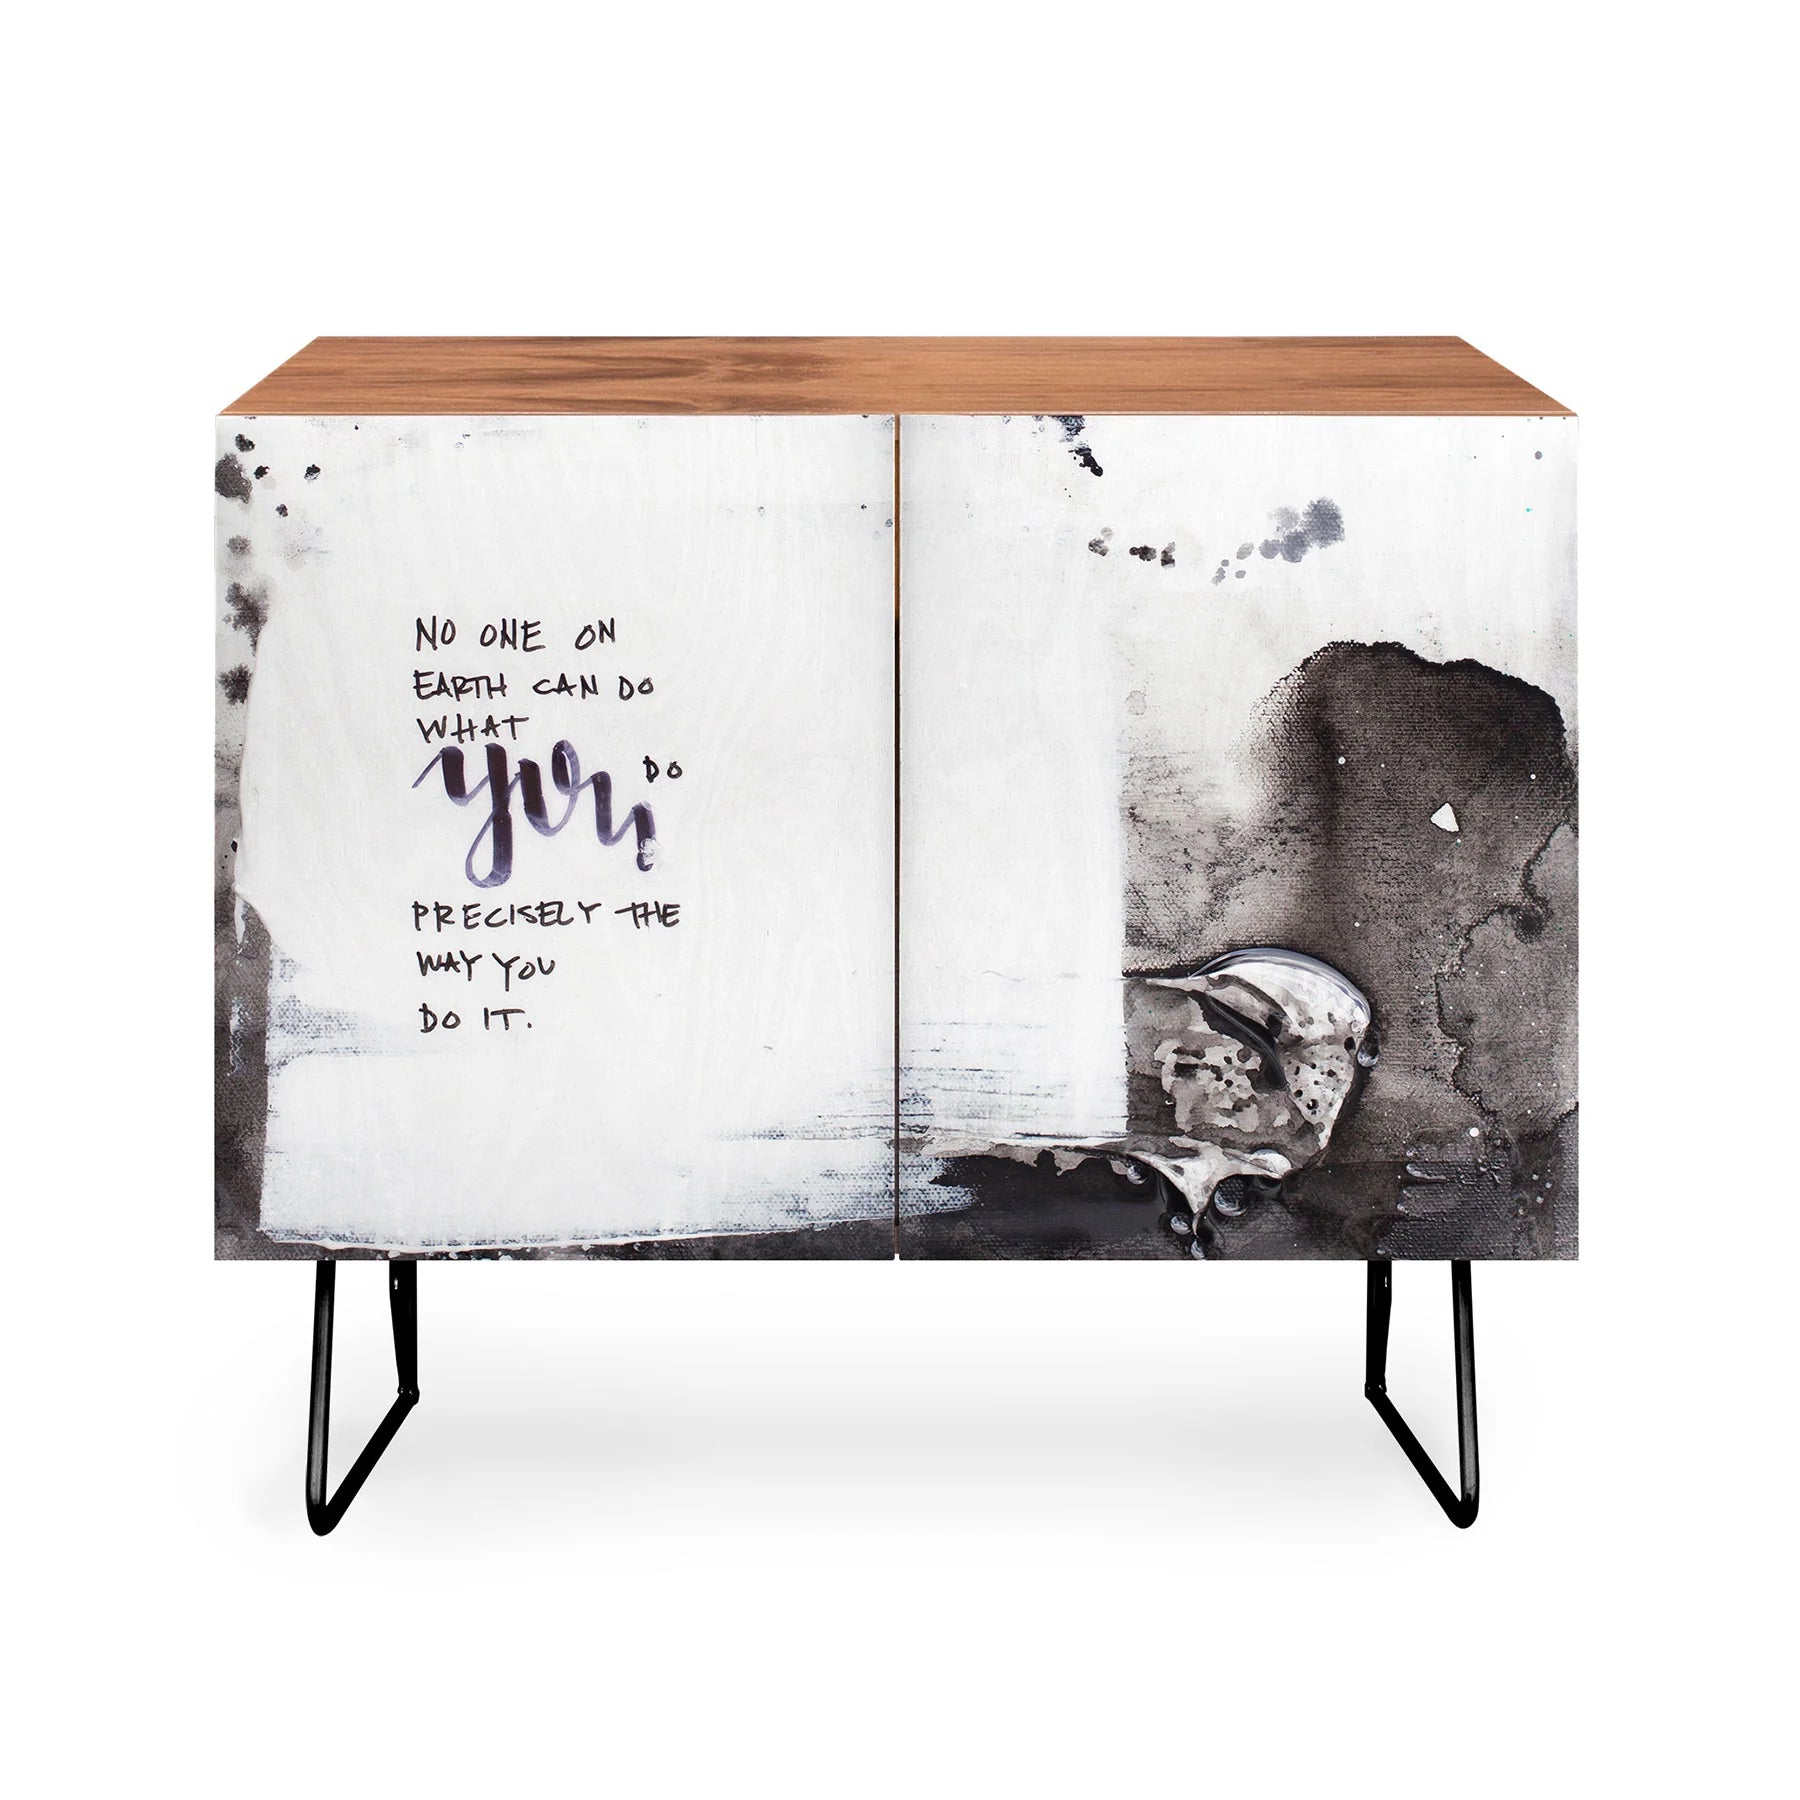 "no one like you" credenza